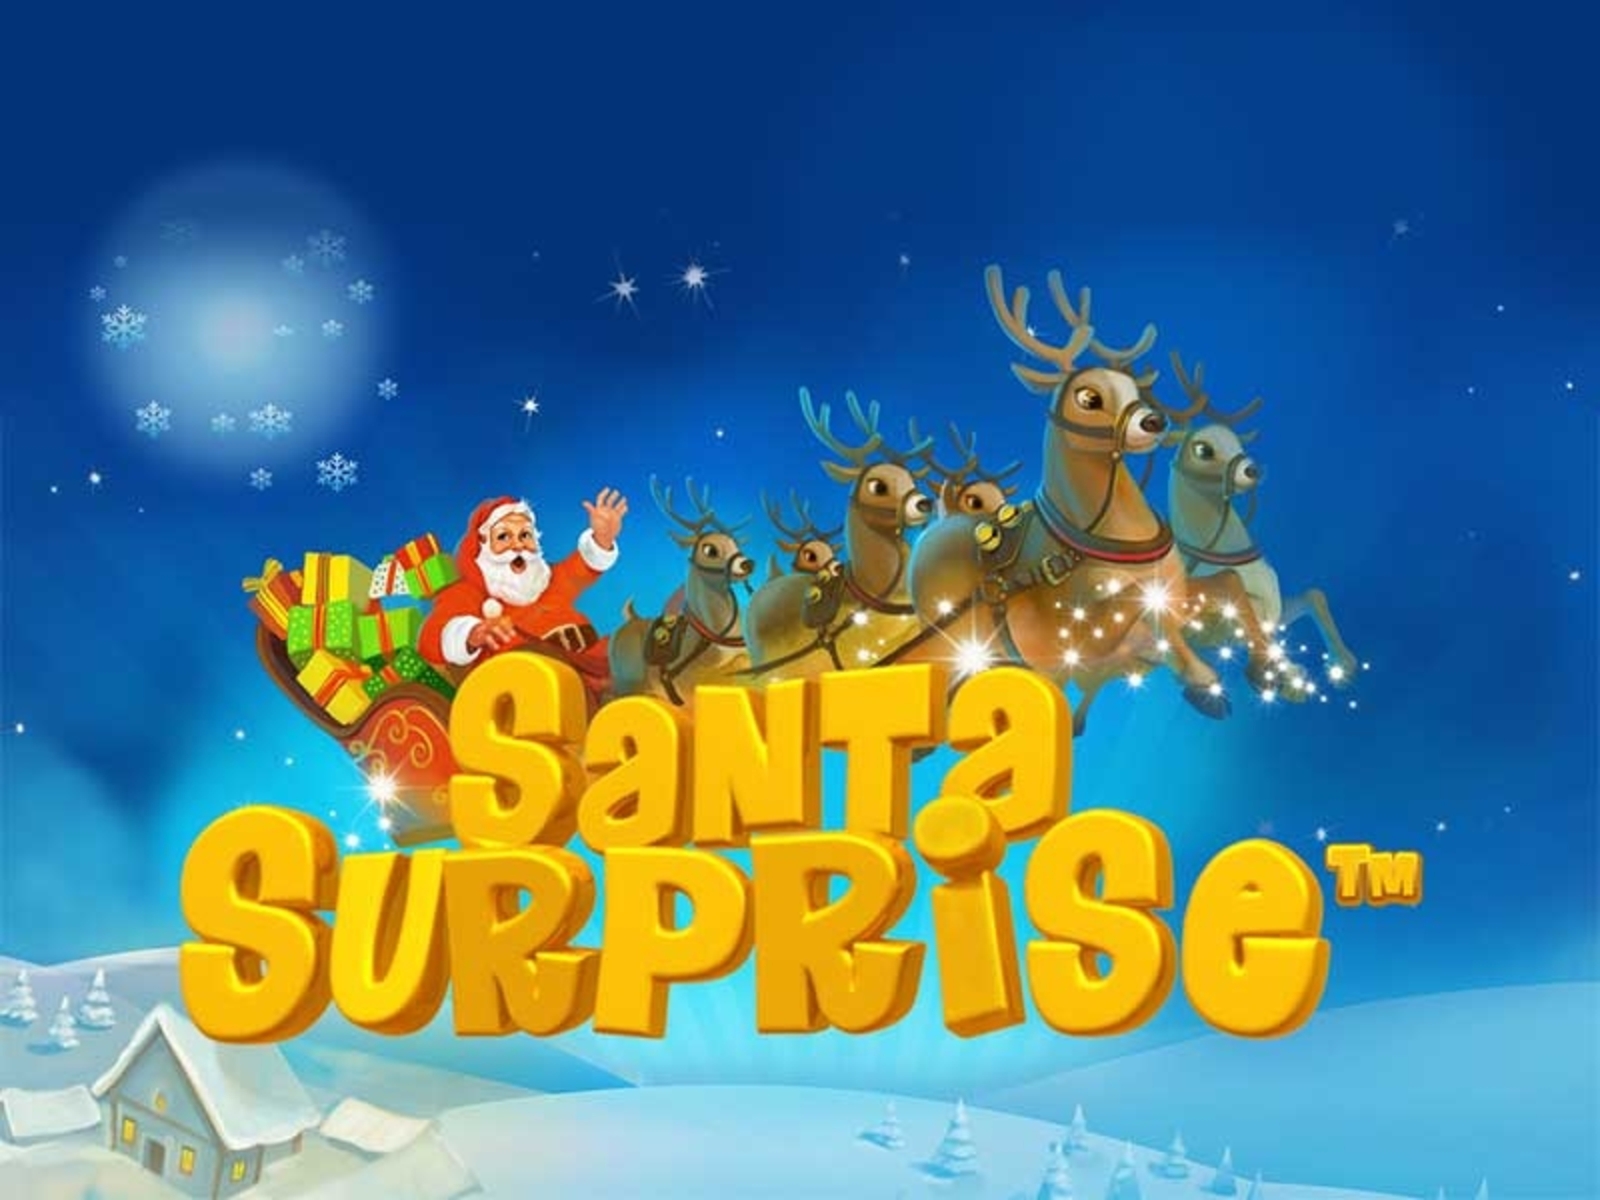 The Santa Surprise Online Slot Demo Game by Playtech